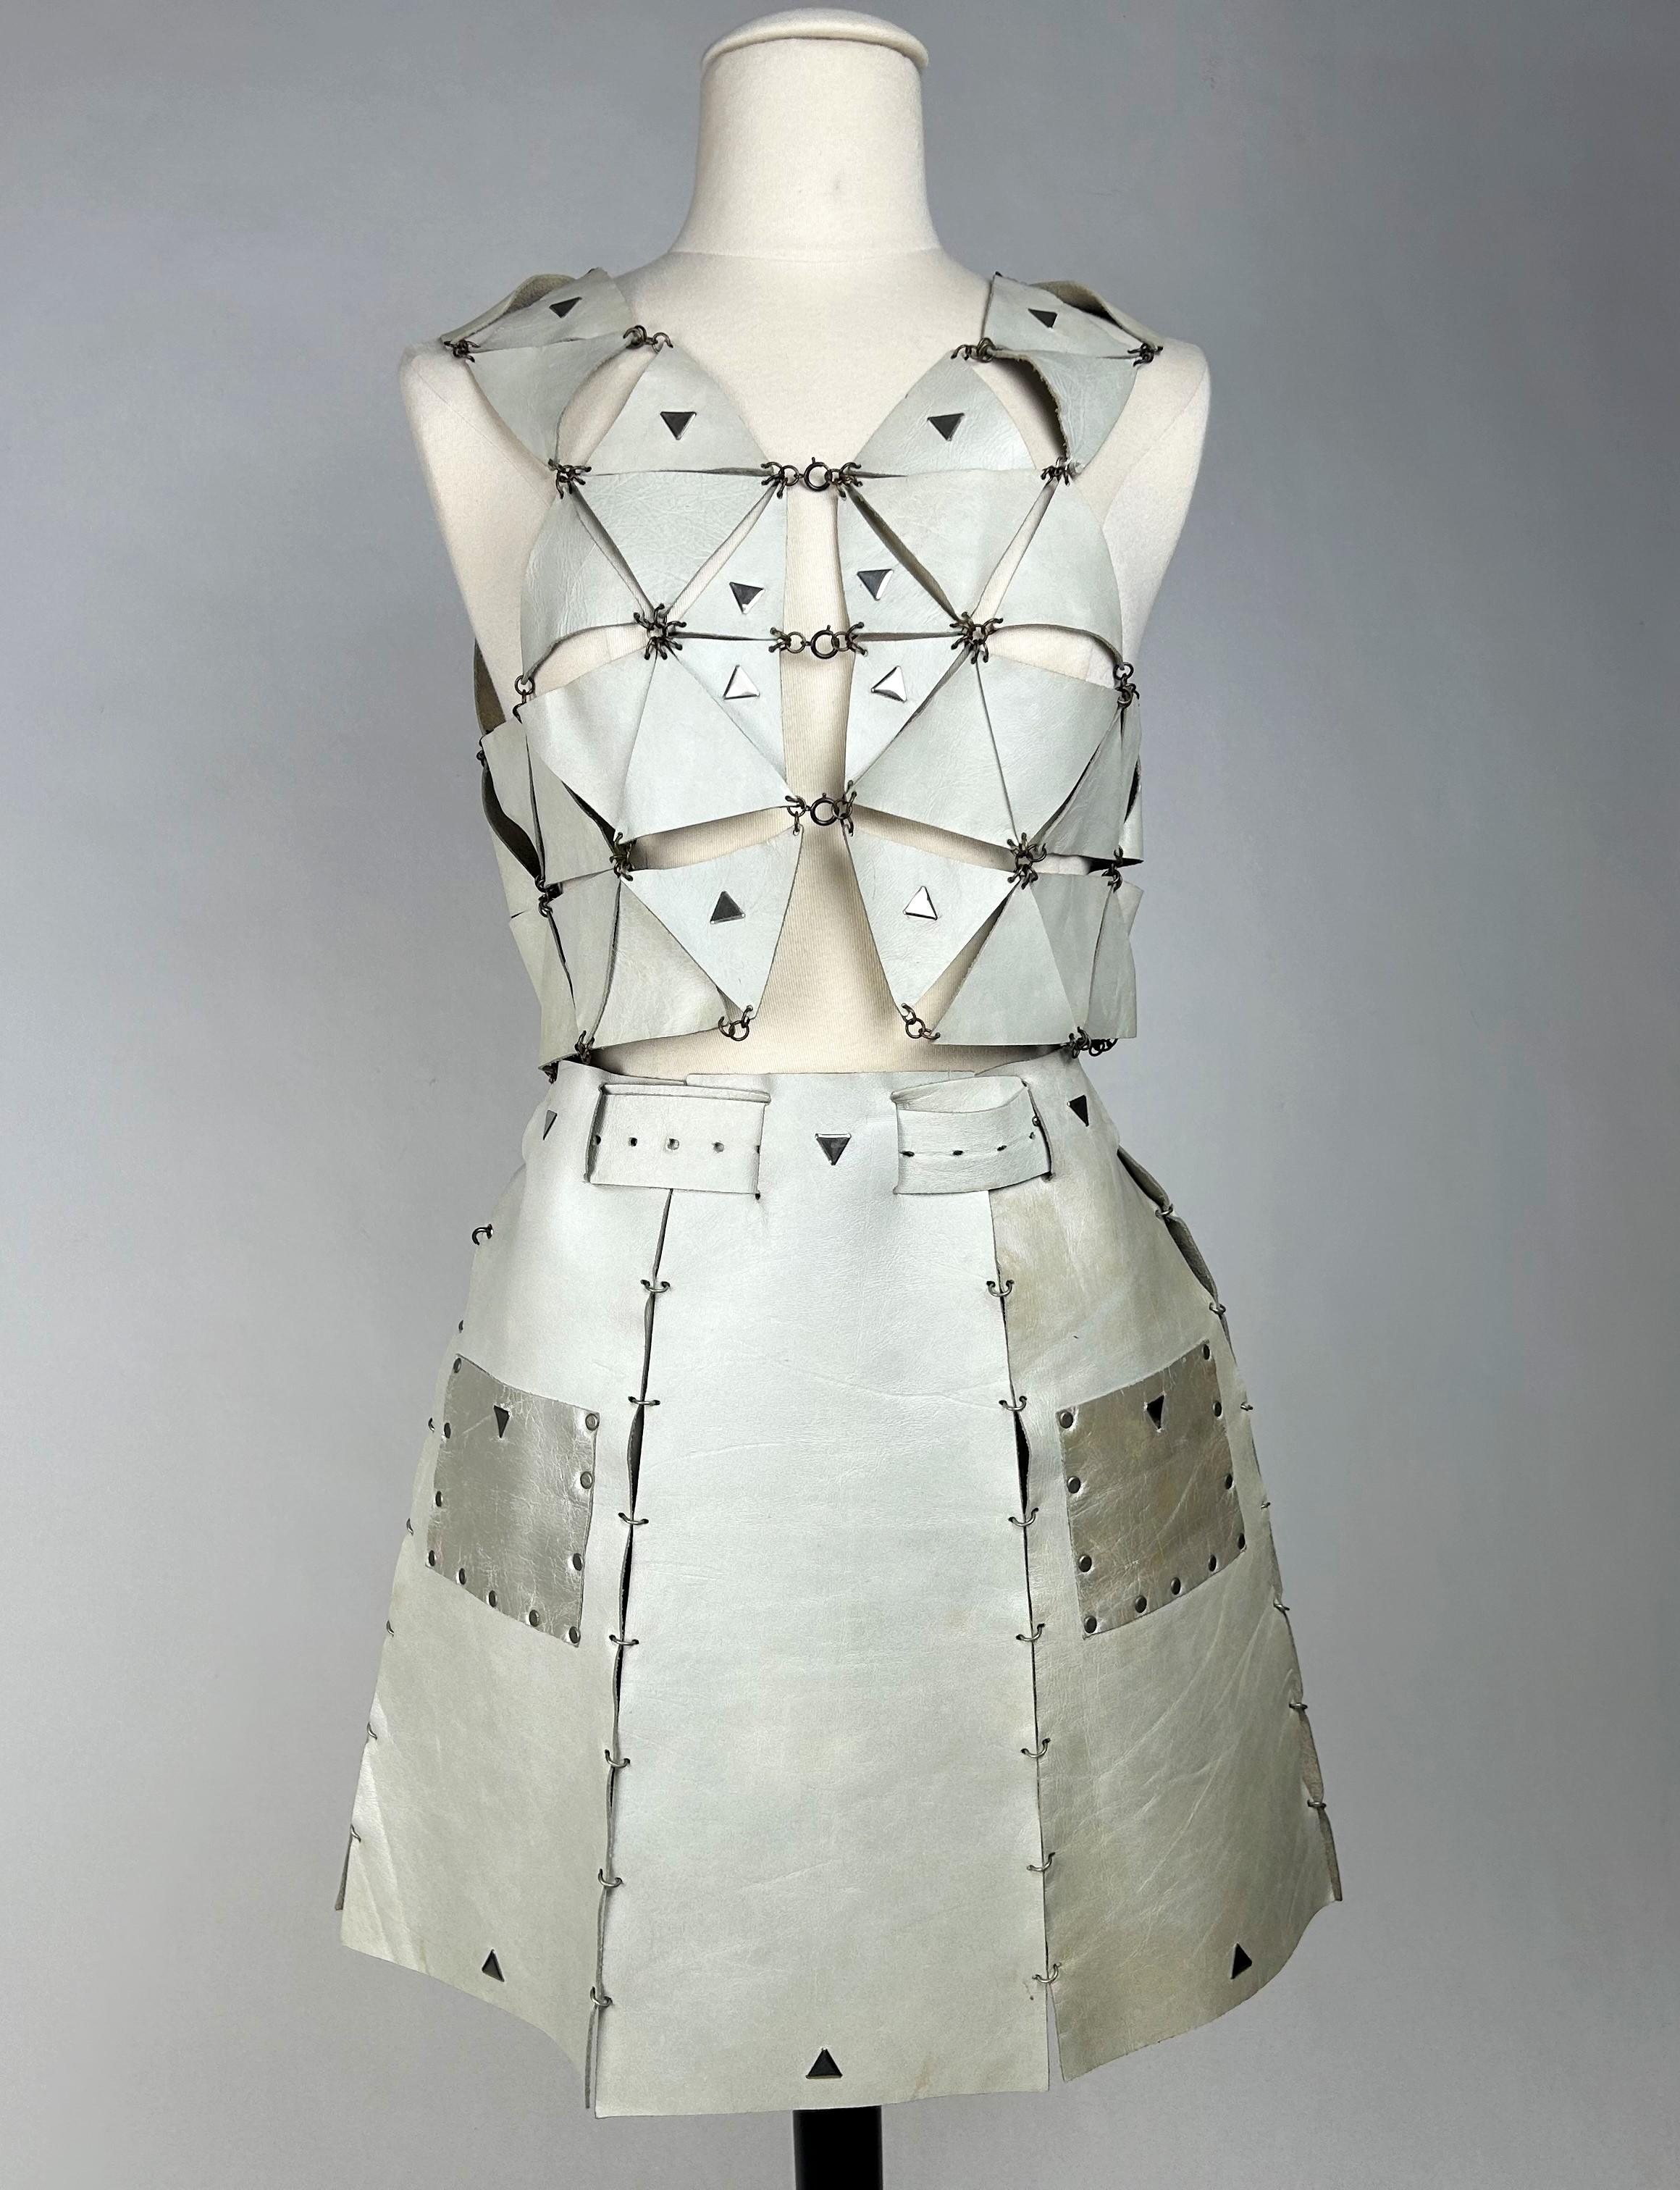 Circa 1967

Paris

Outfit in leather by Paco Rabanne, mini-skirt and open bolero with triangular ivory leather cut-outs held in place by metal rings. Skirt with flared panels appliqué with silvered pockets and brushed steel triangular studs, with an